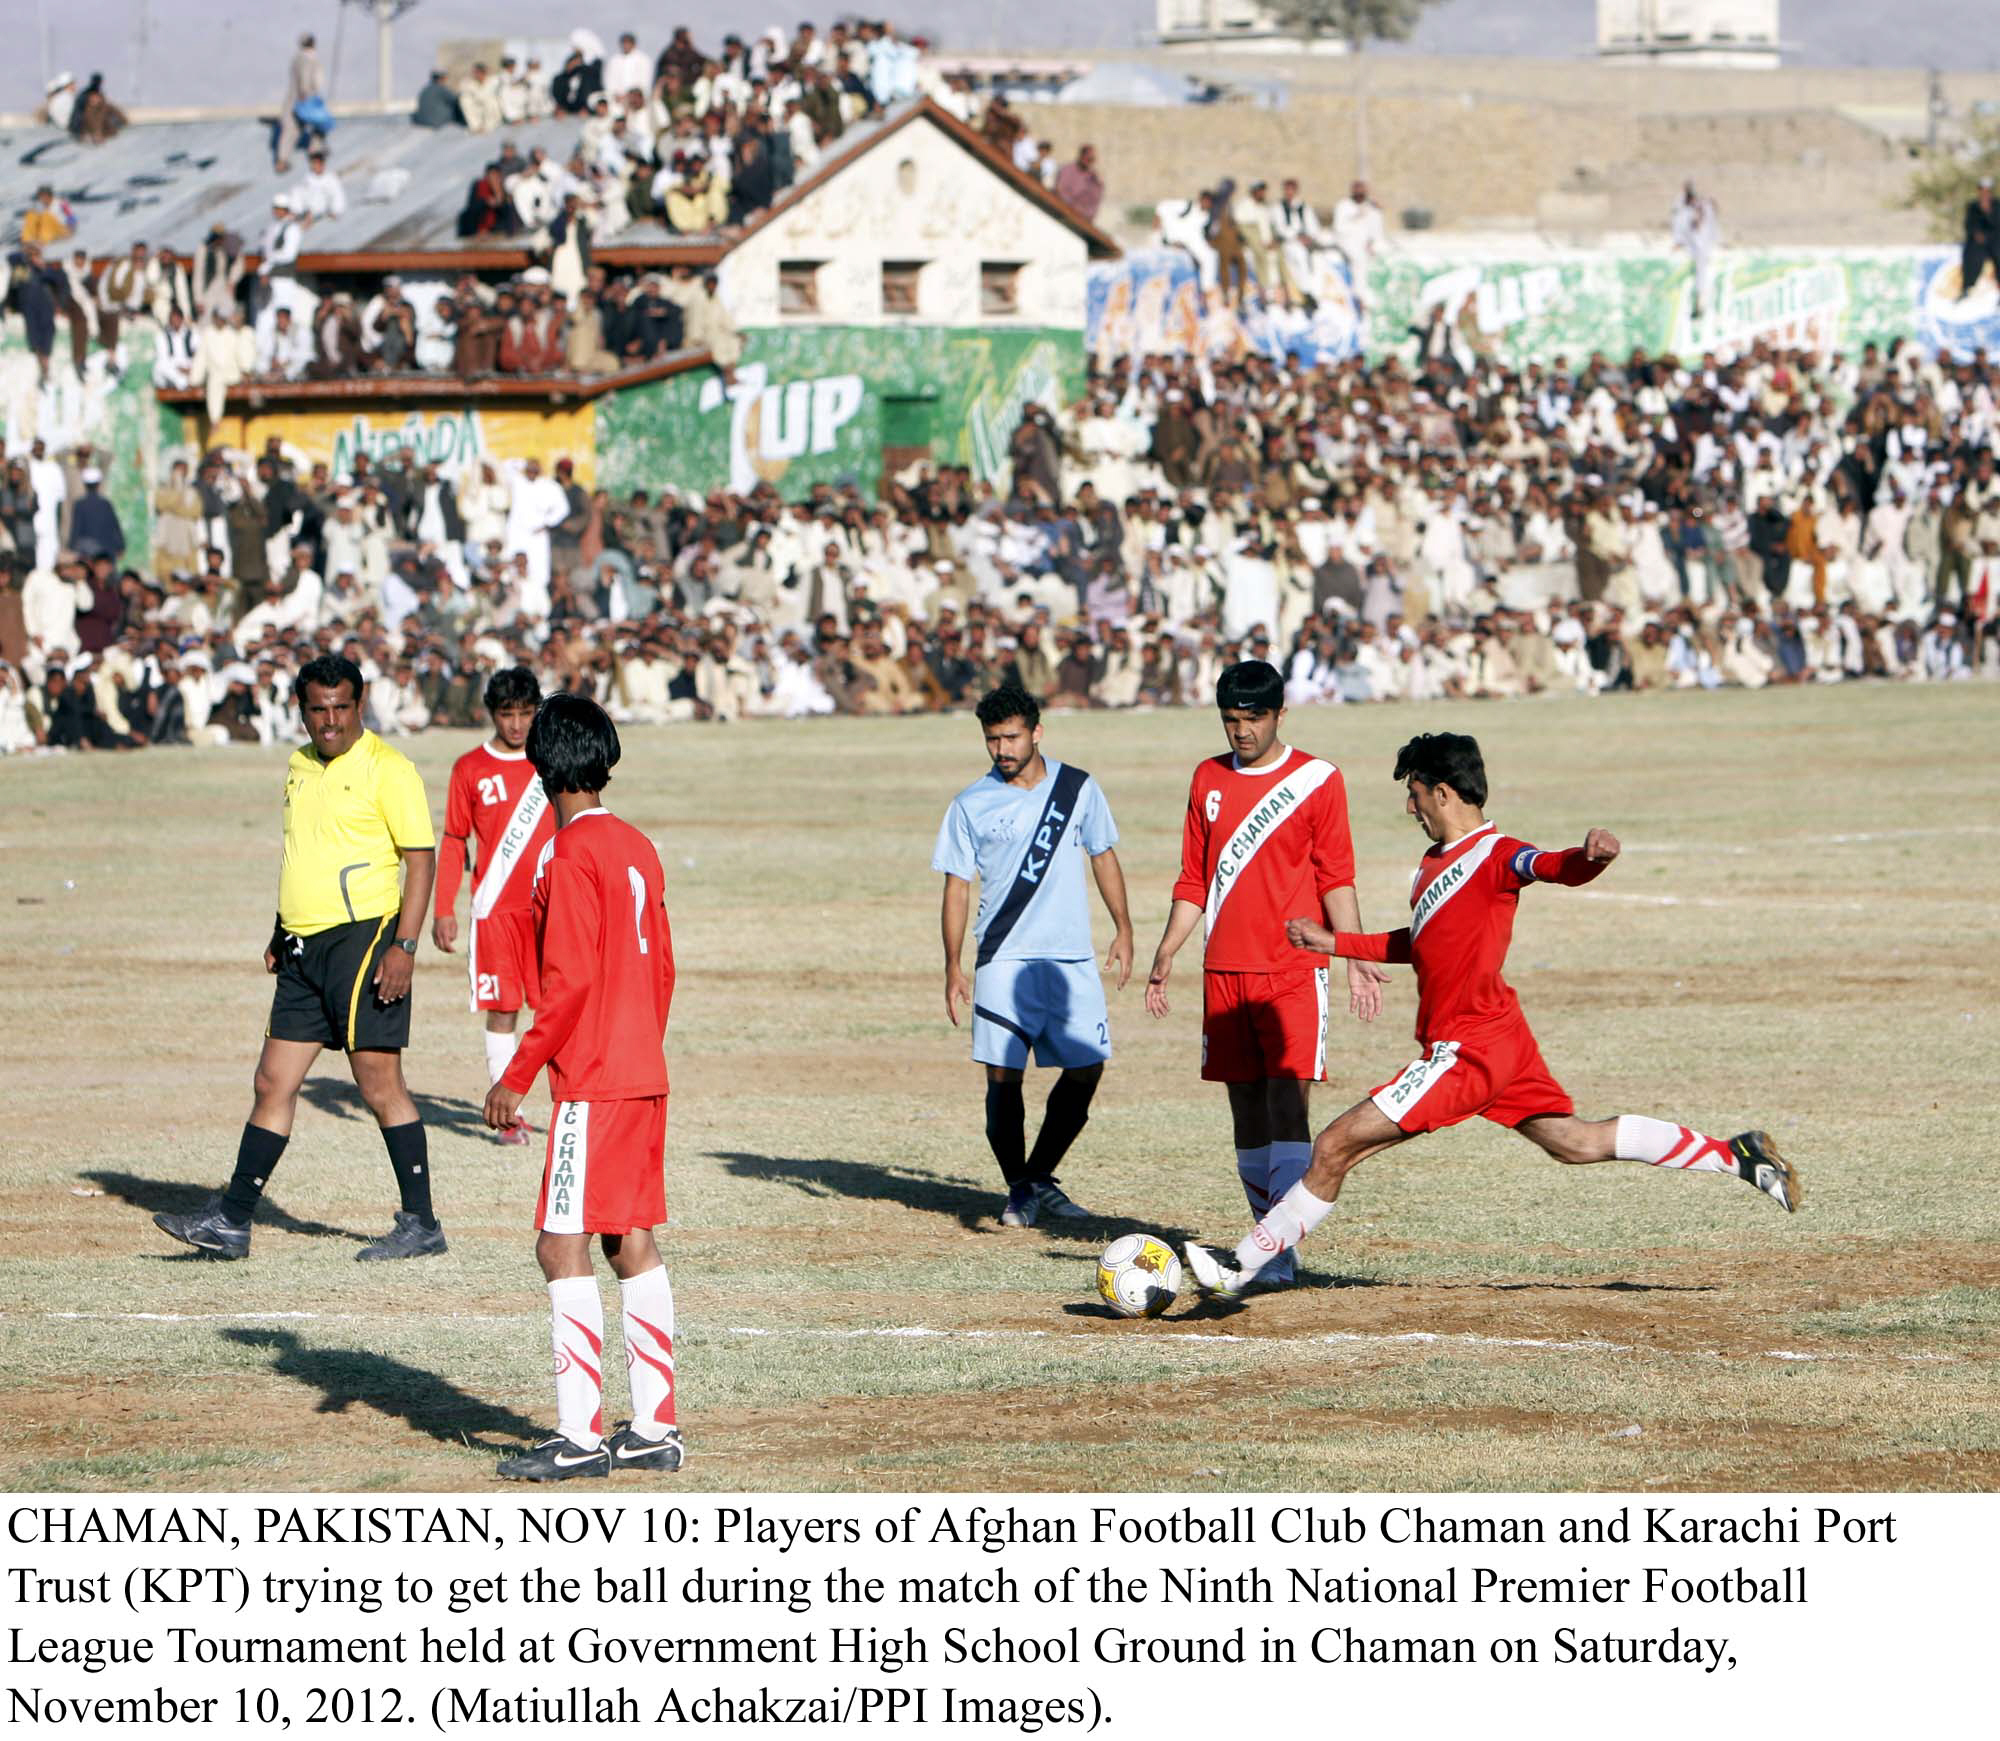 a player from the afghan club chaman shoots during their match with kpt photo ppi